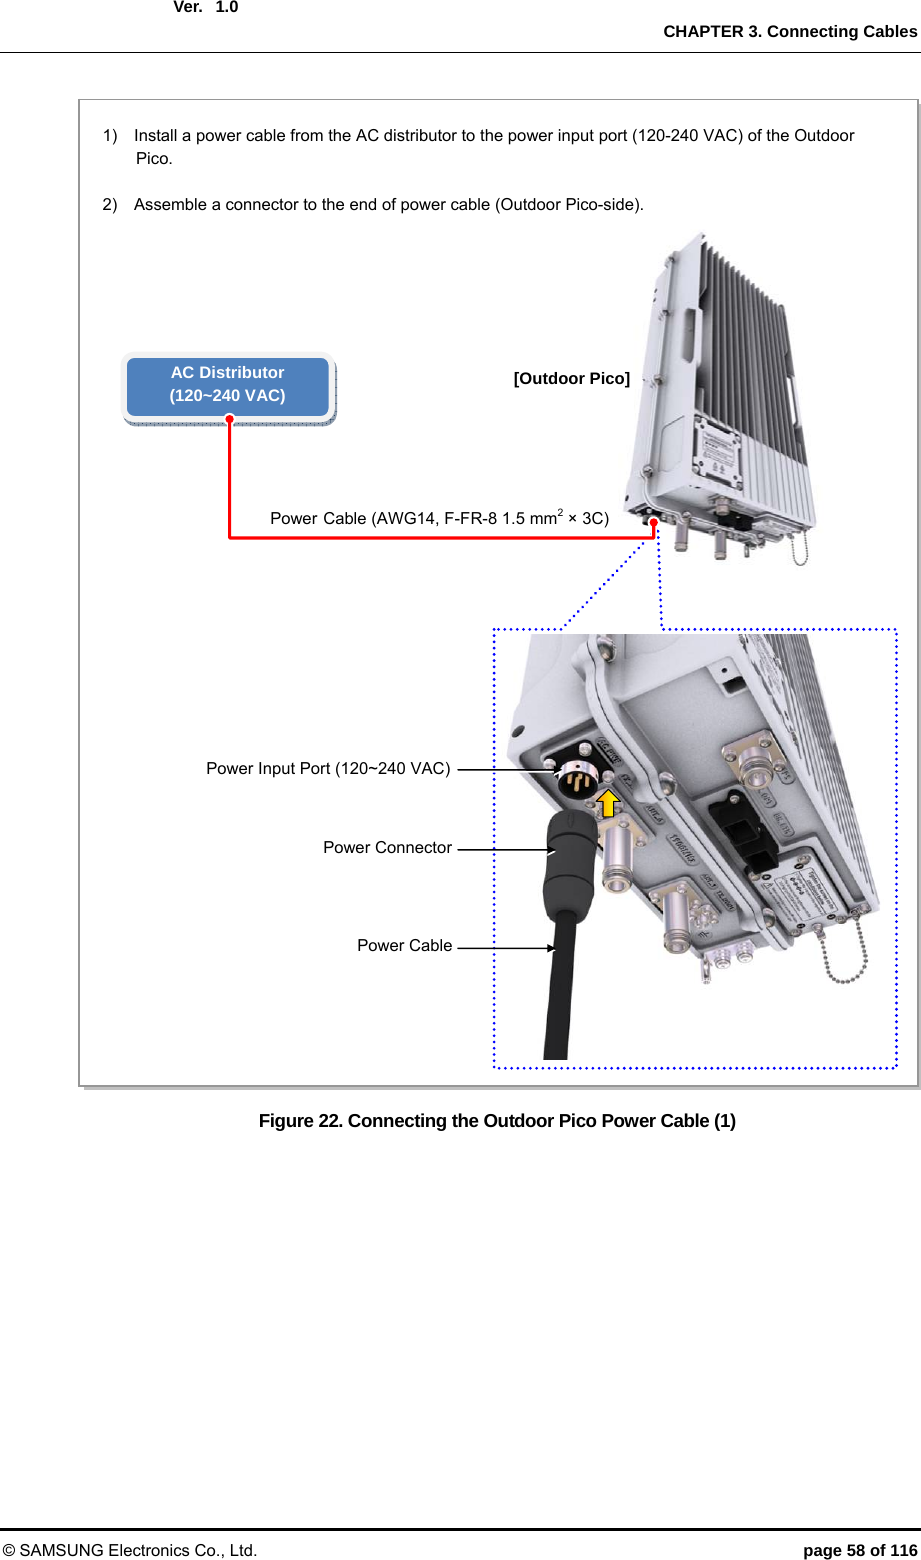  Ver.   CHAPTER 3. Connecting Cables © SAMSUNG Electronics Co., Ltd.  page 58 of 116 1.0Figure 22. Connecting the Outdoor Pico Power Cable (1)    AC Distributor (120~240 VAC) 1)    Install a power cable from the AC distributor to the power input port (120-240 VAC) of the Outdoor       Pico.  2)    Assemble a connector to the end of power cable (Outdoor Pico-side).    Power Cable (AWG14, F-FR-8 1.5 mm2 × 3C) [Outdoor Pico] Power ConnectorPower CablePower Input Port (120~240 VAC)